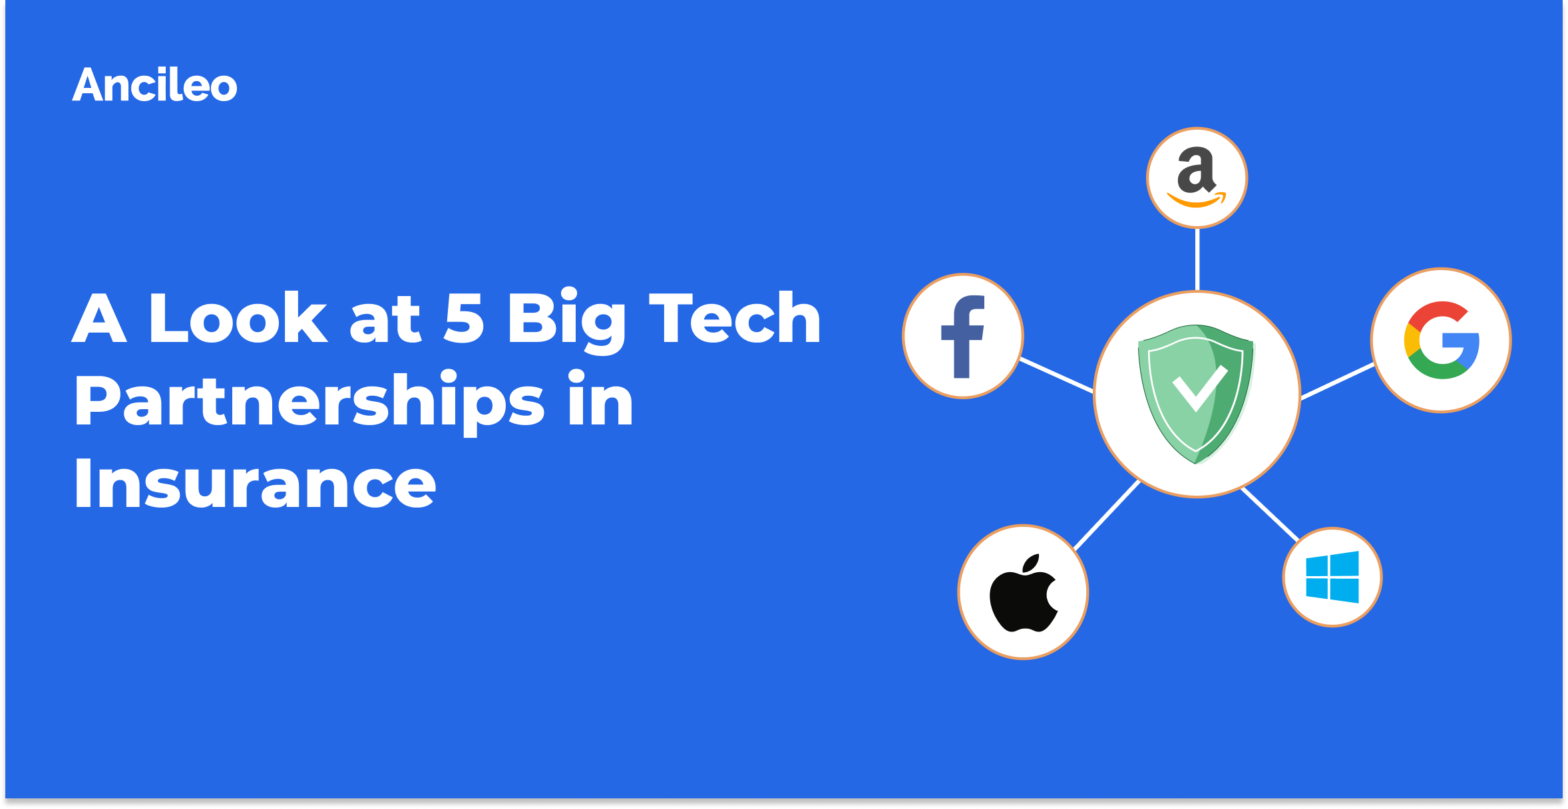 A Look at 5 Big Tech Partnerships in Insurance